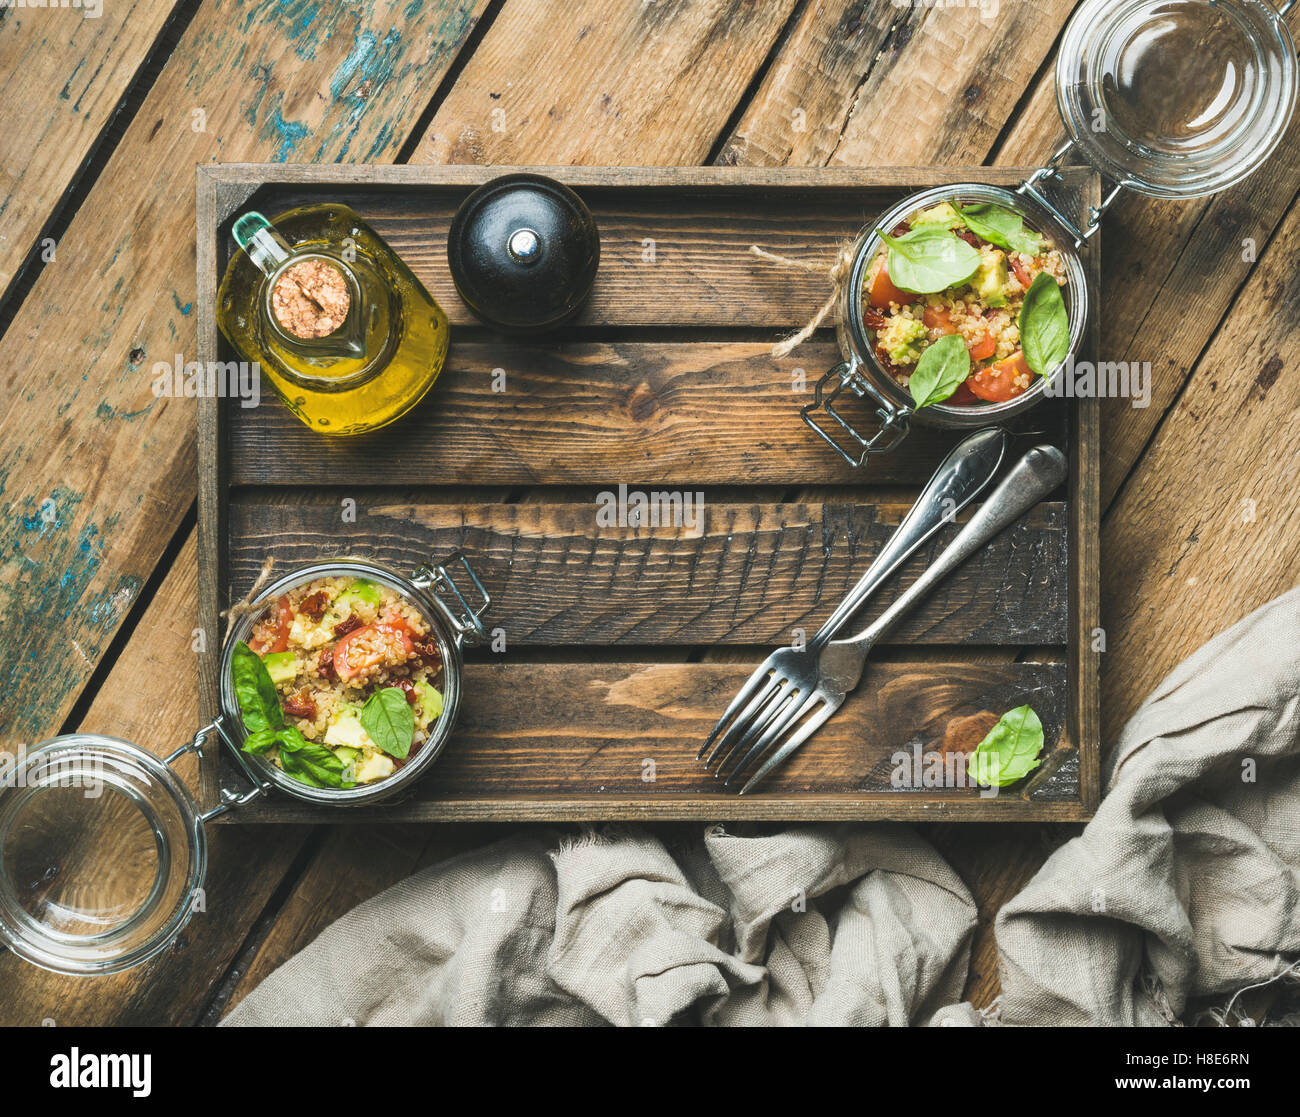 Healthy homemade glass jar quinoa salad with cherry and sun-dried tomatoes, avocado, basil in wooden box over rustic background, Stock Photo